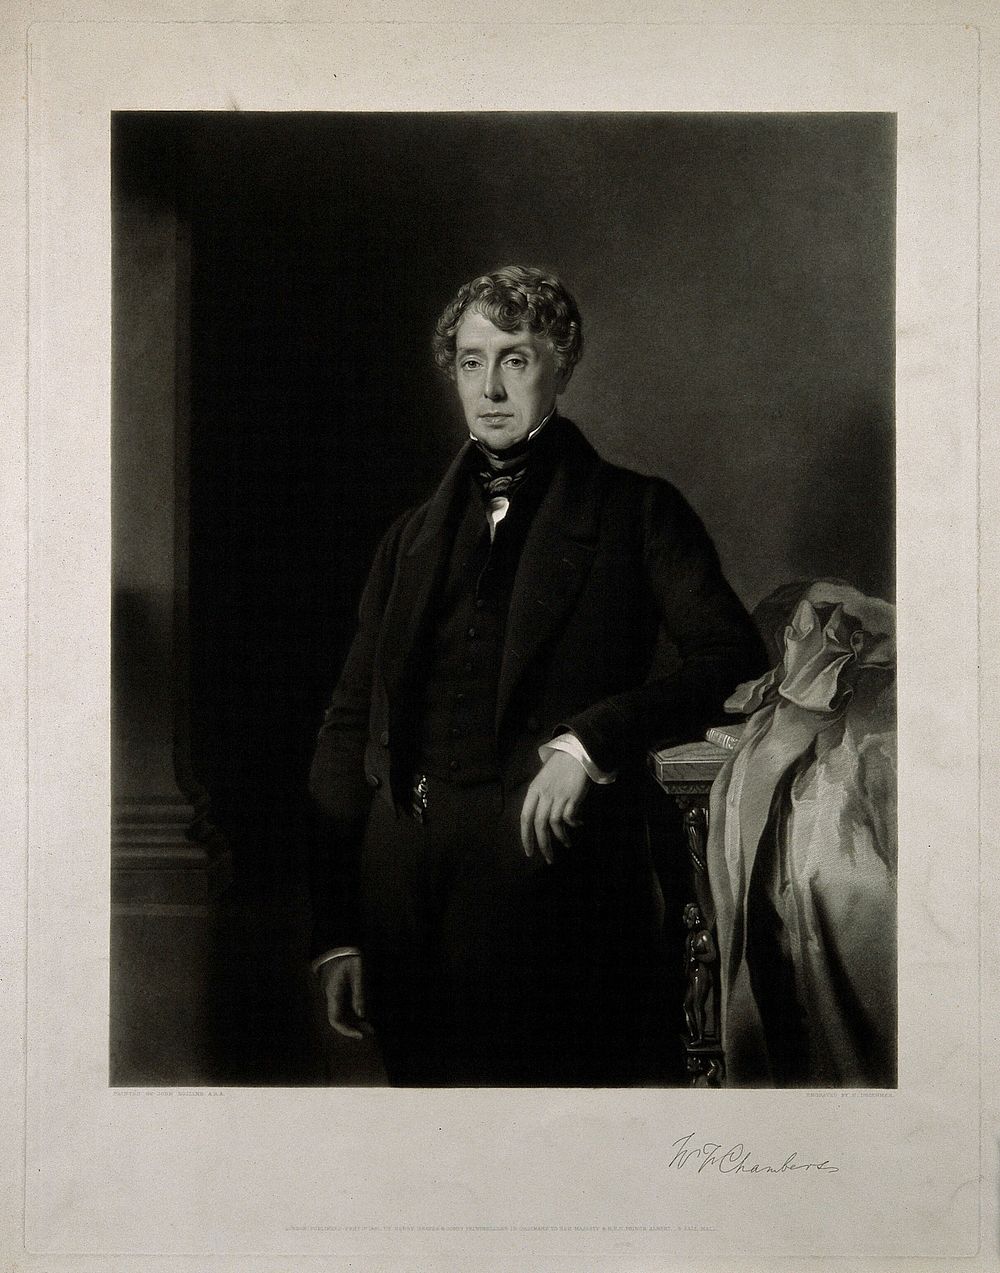 William Frederick Chambers. Mezzotint by H. Droehmer, 1851, after J. Hollins, 1842.